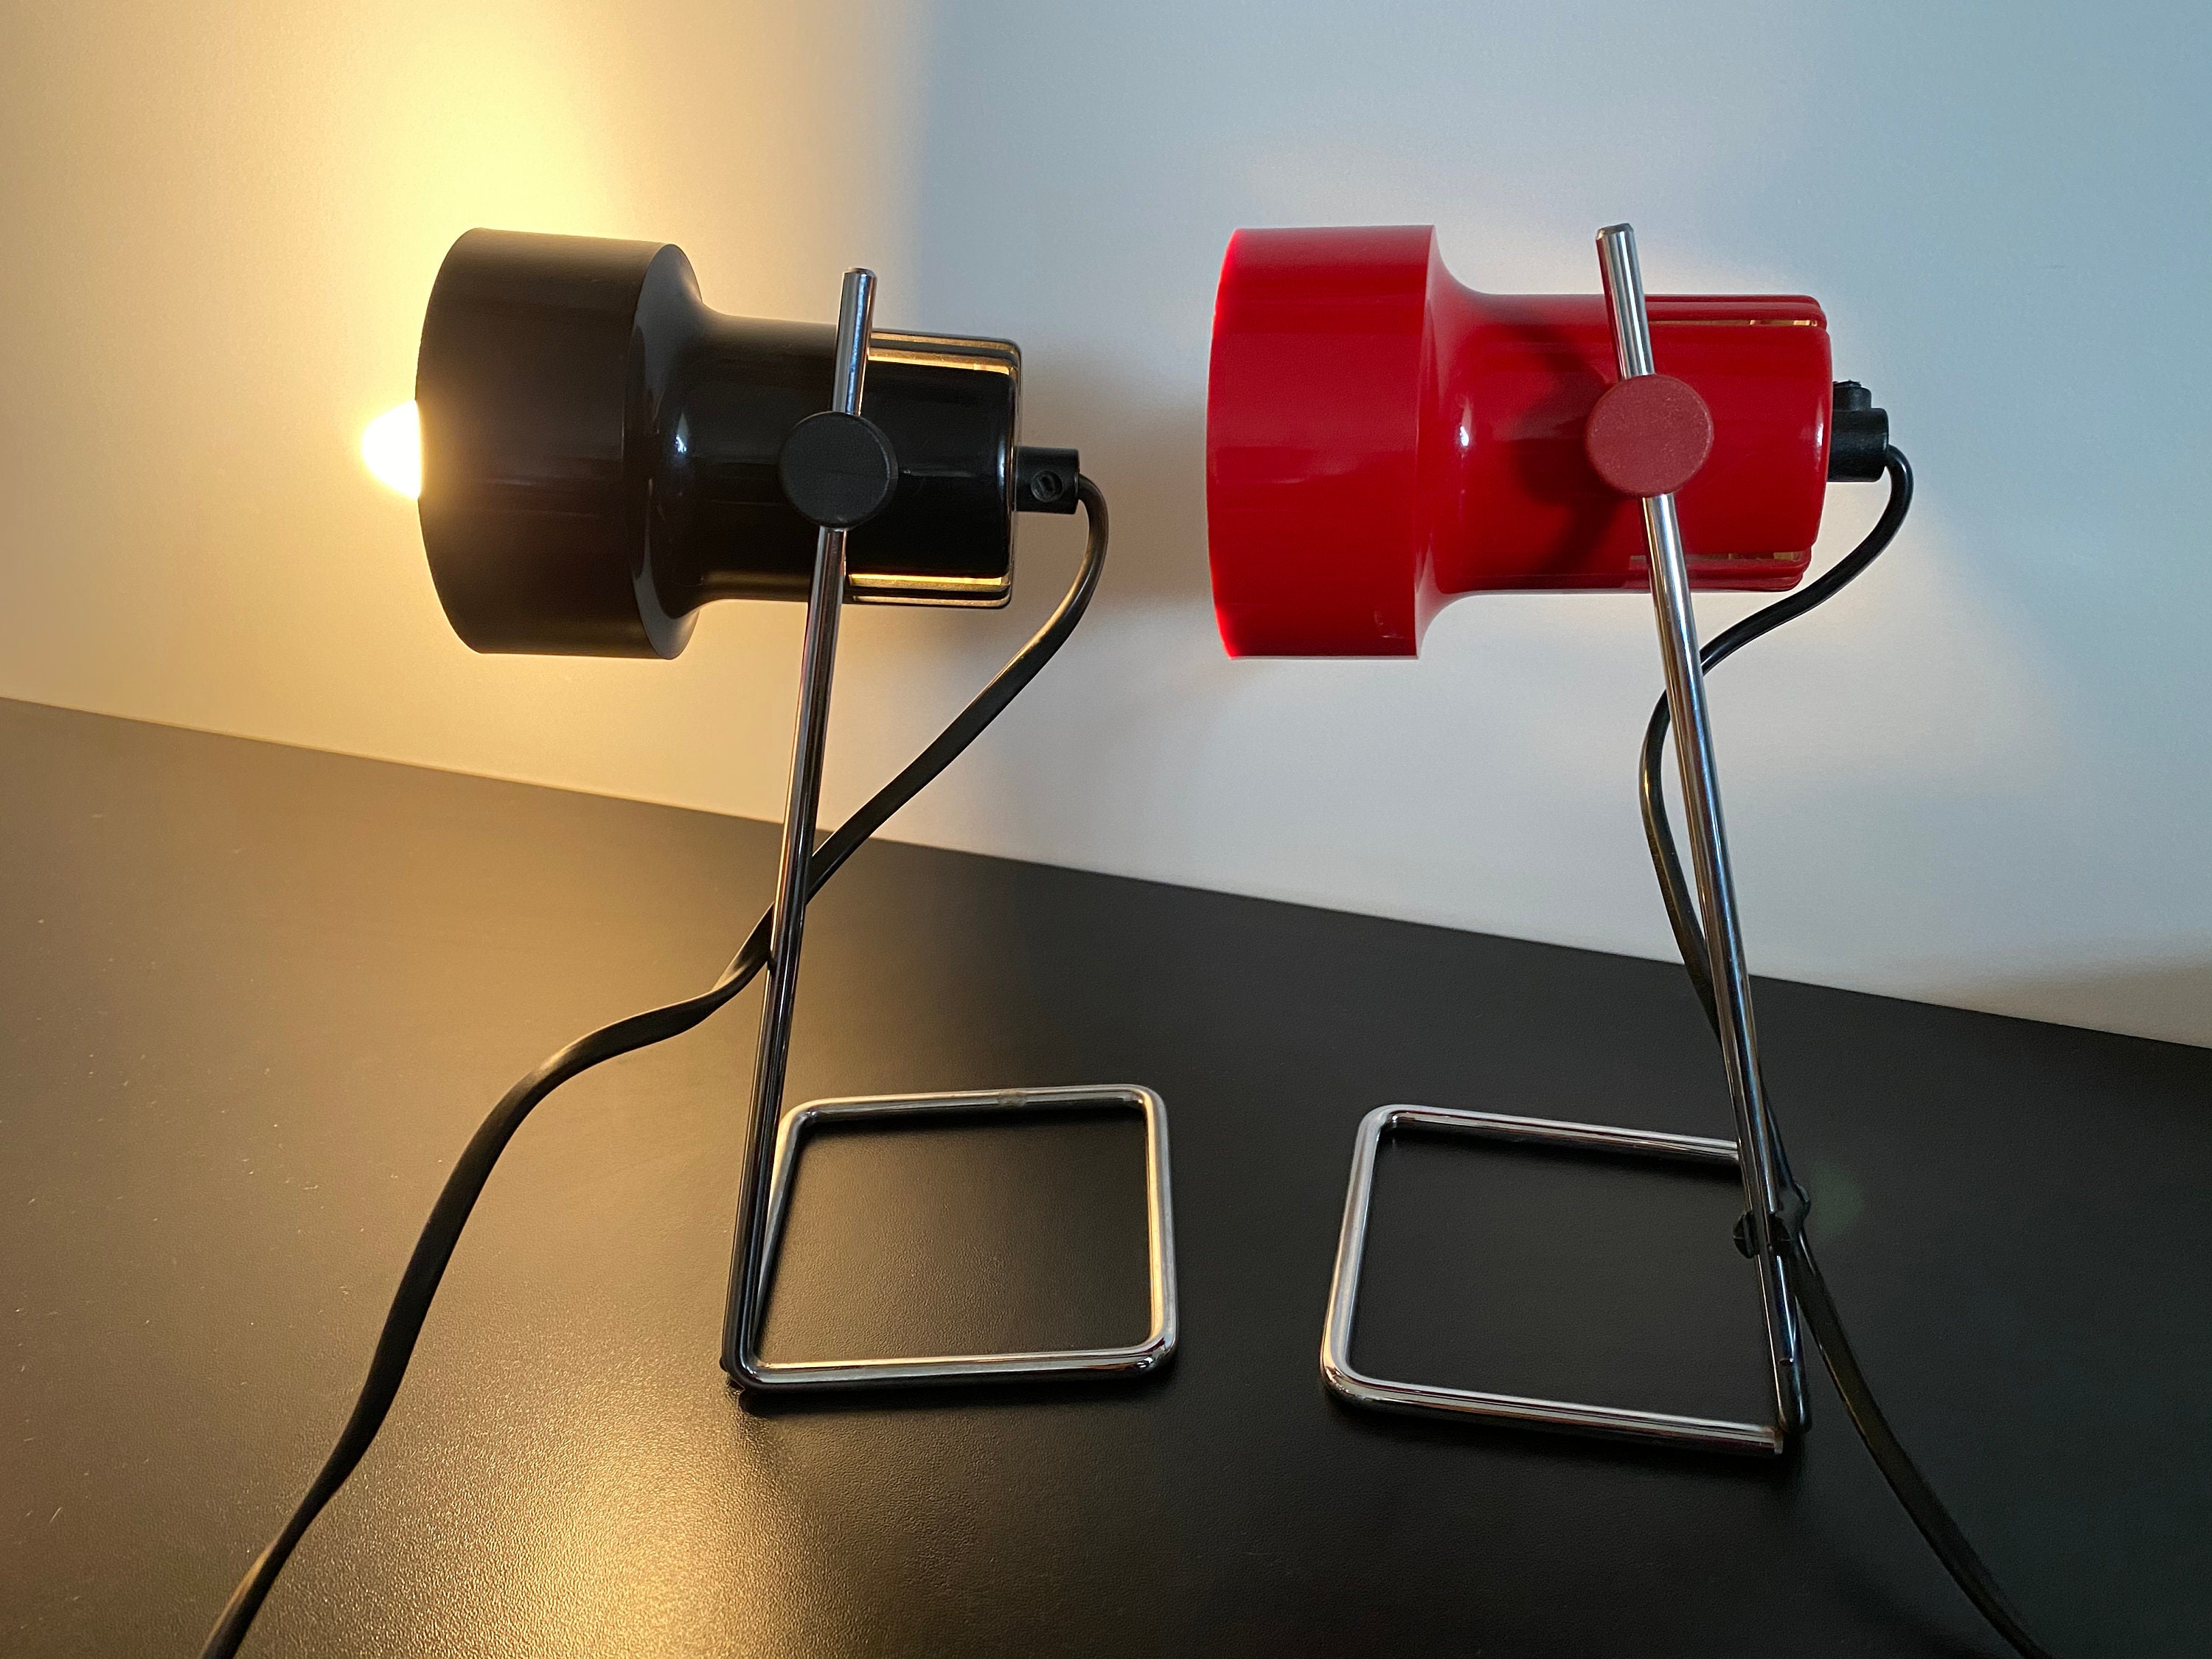 Lampe Cgm Vintage 1970, Noire ou Rouge, French Design France Office Modernist Brutalist Space Age Be